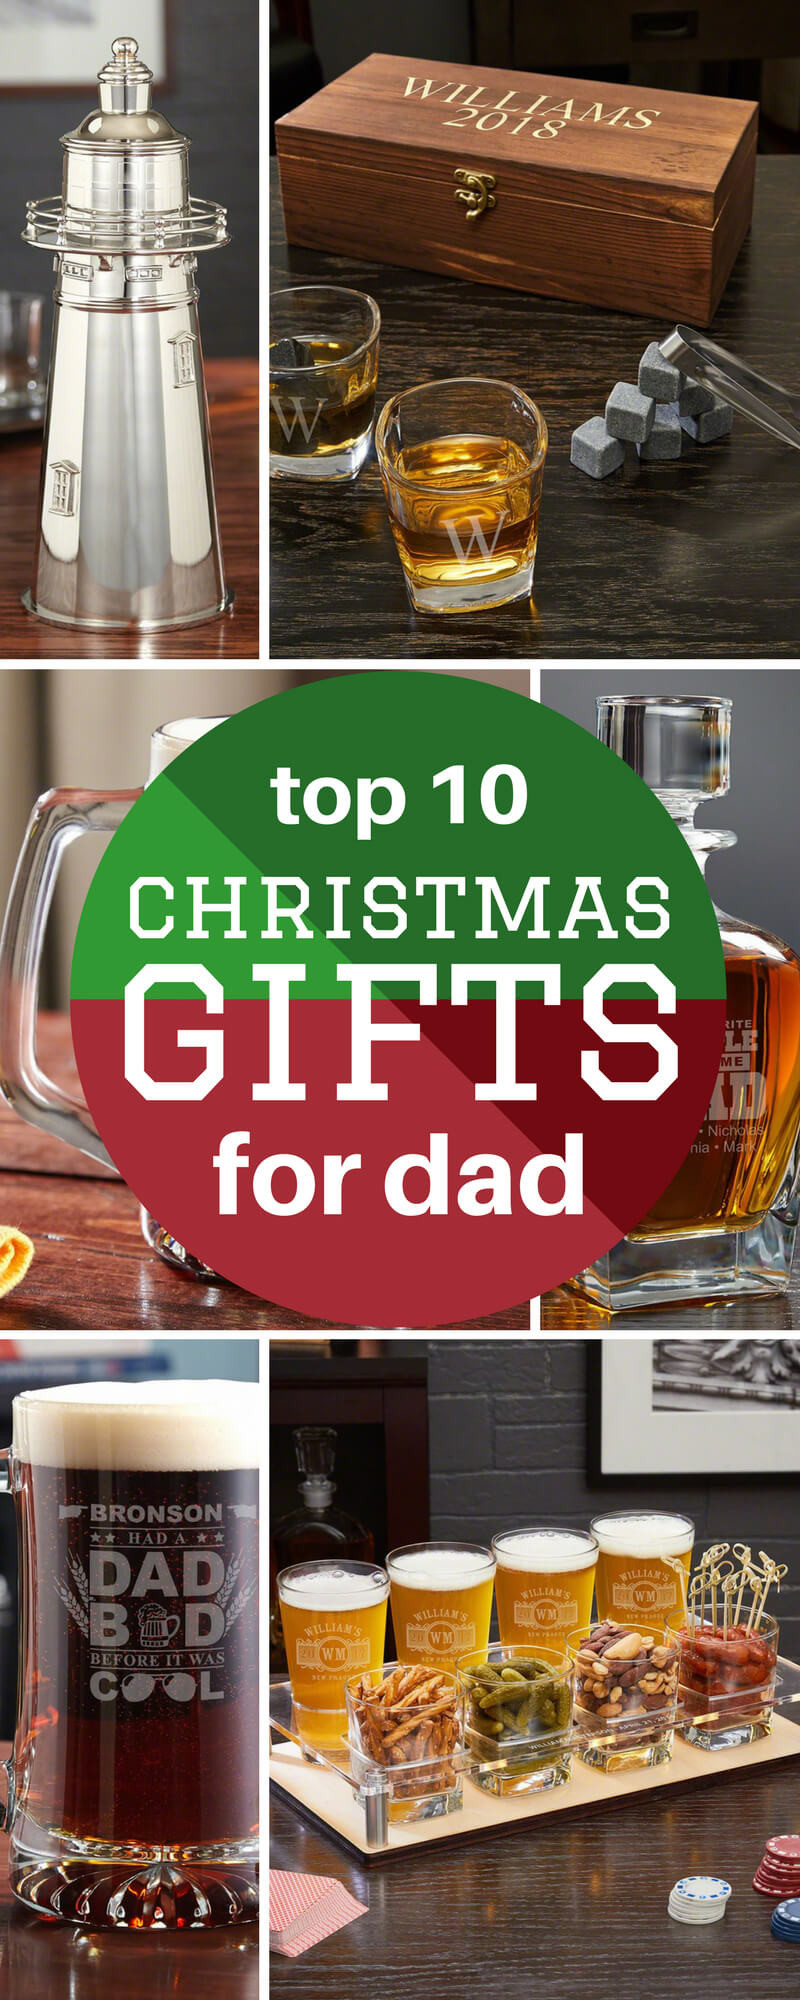 Christmas Gifts For Dad
 18 Best Gifts for Fathers for Christmas